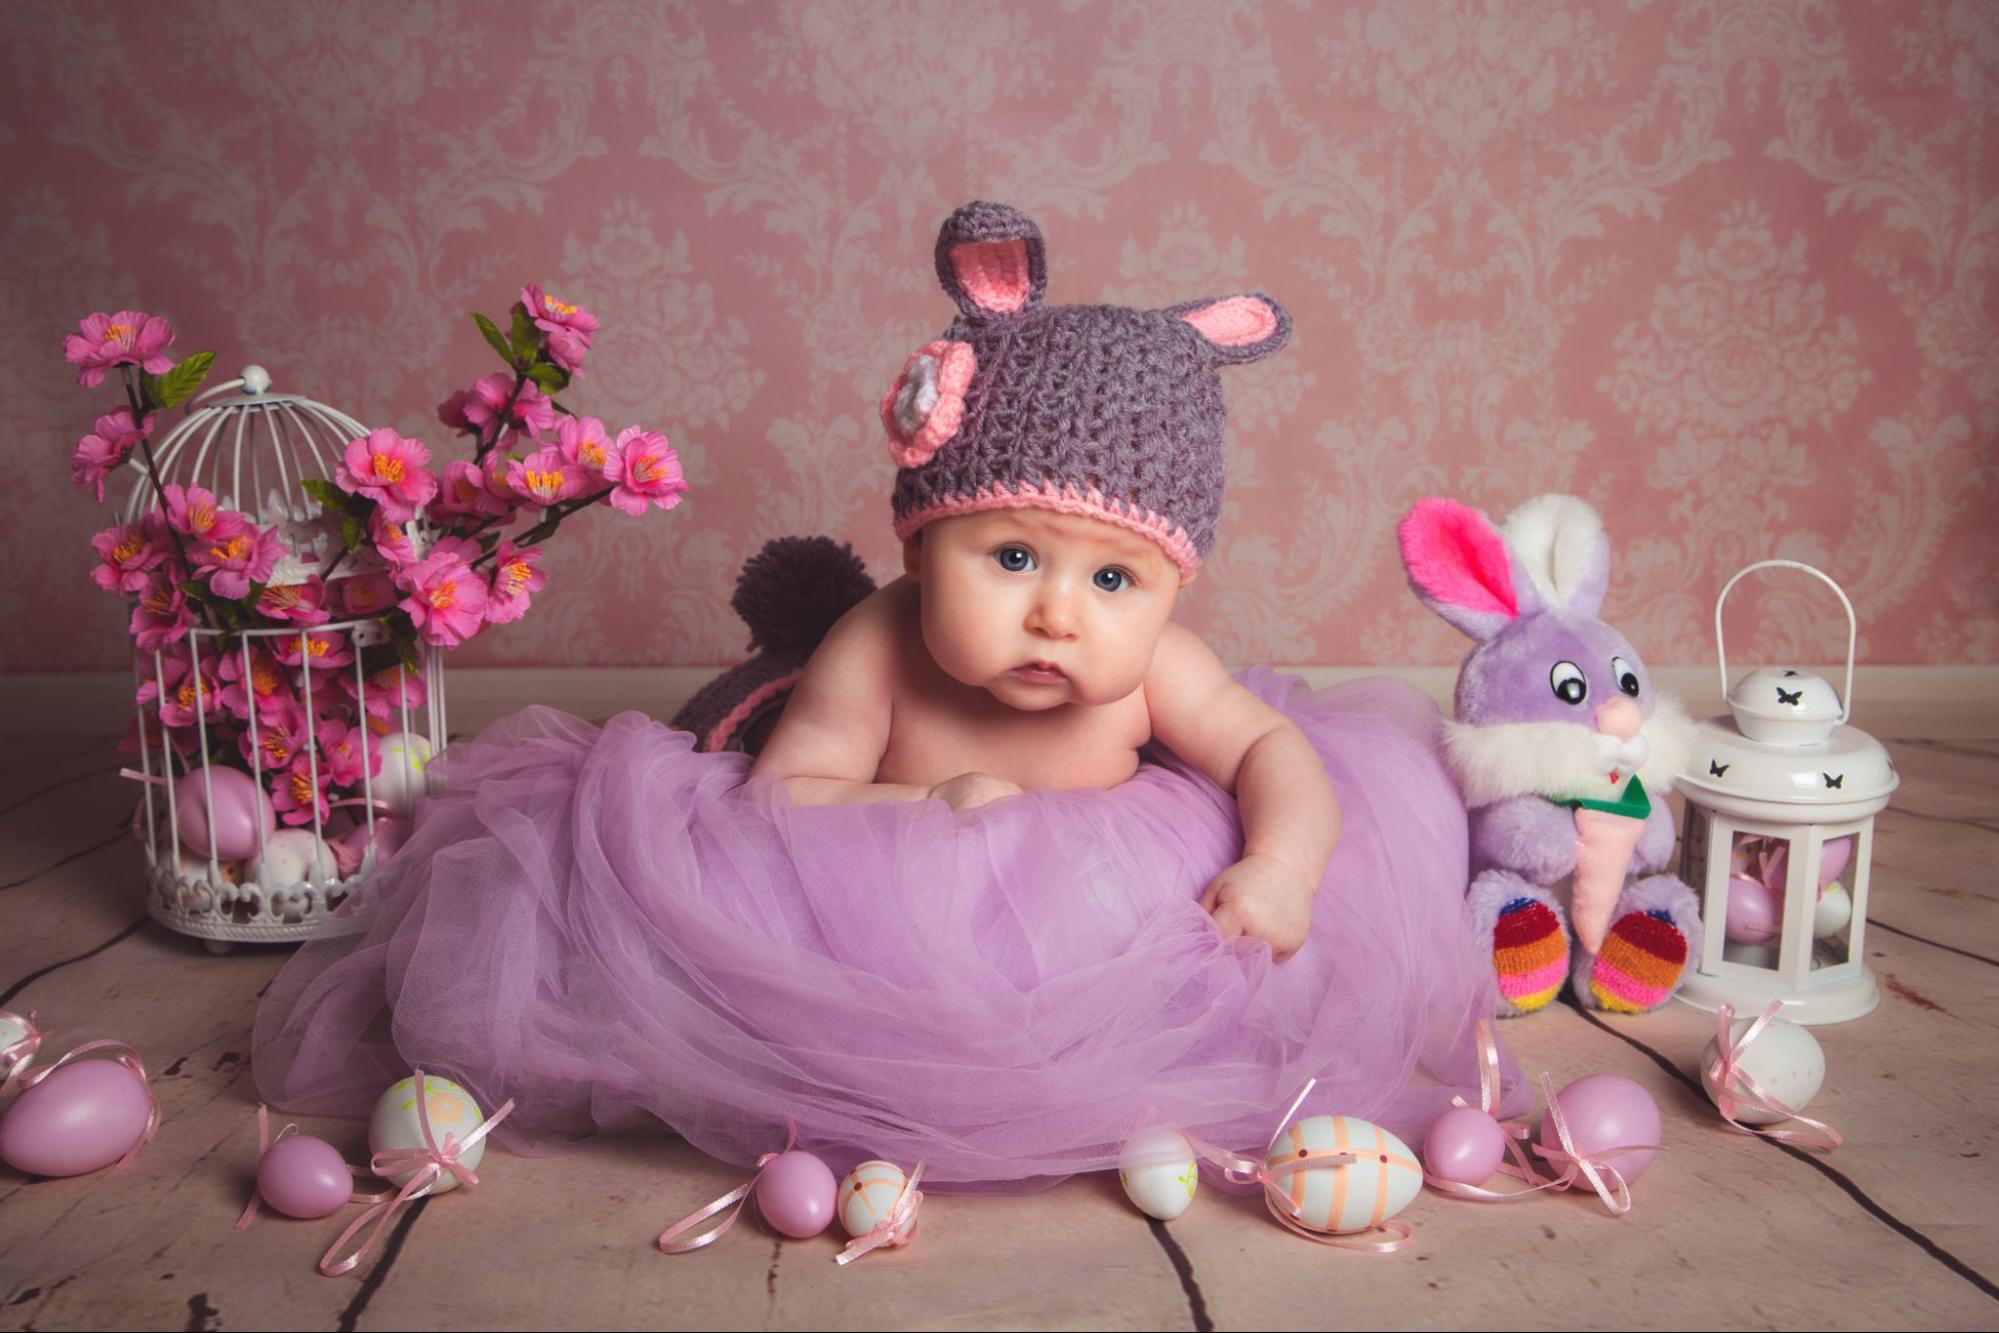 Creative props and backgrounds, adding magic to baby's photoshoot.